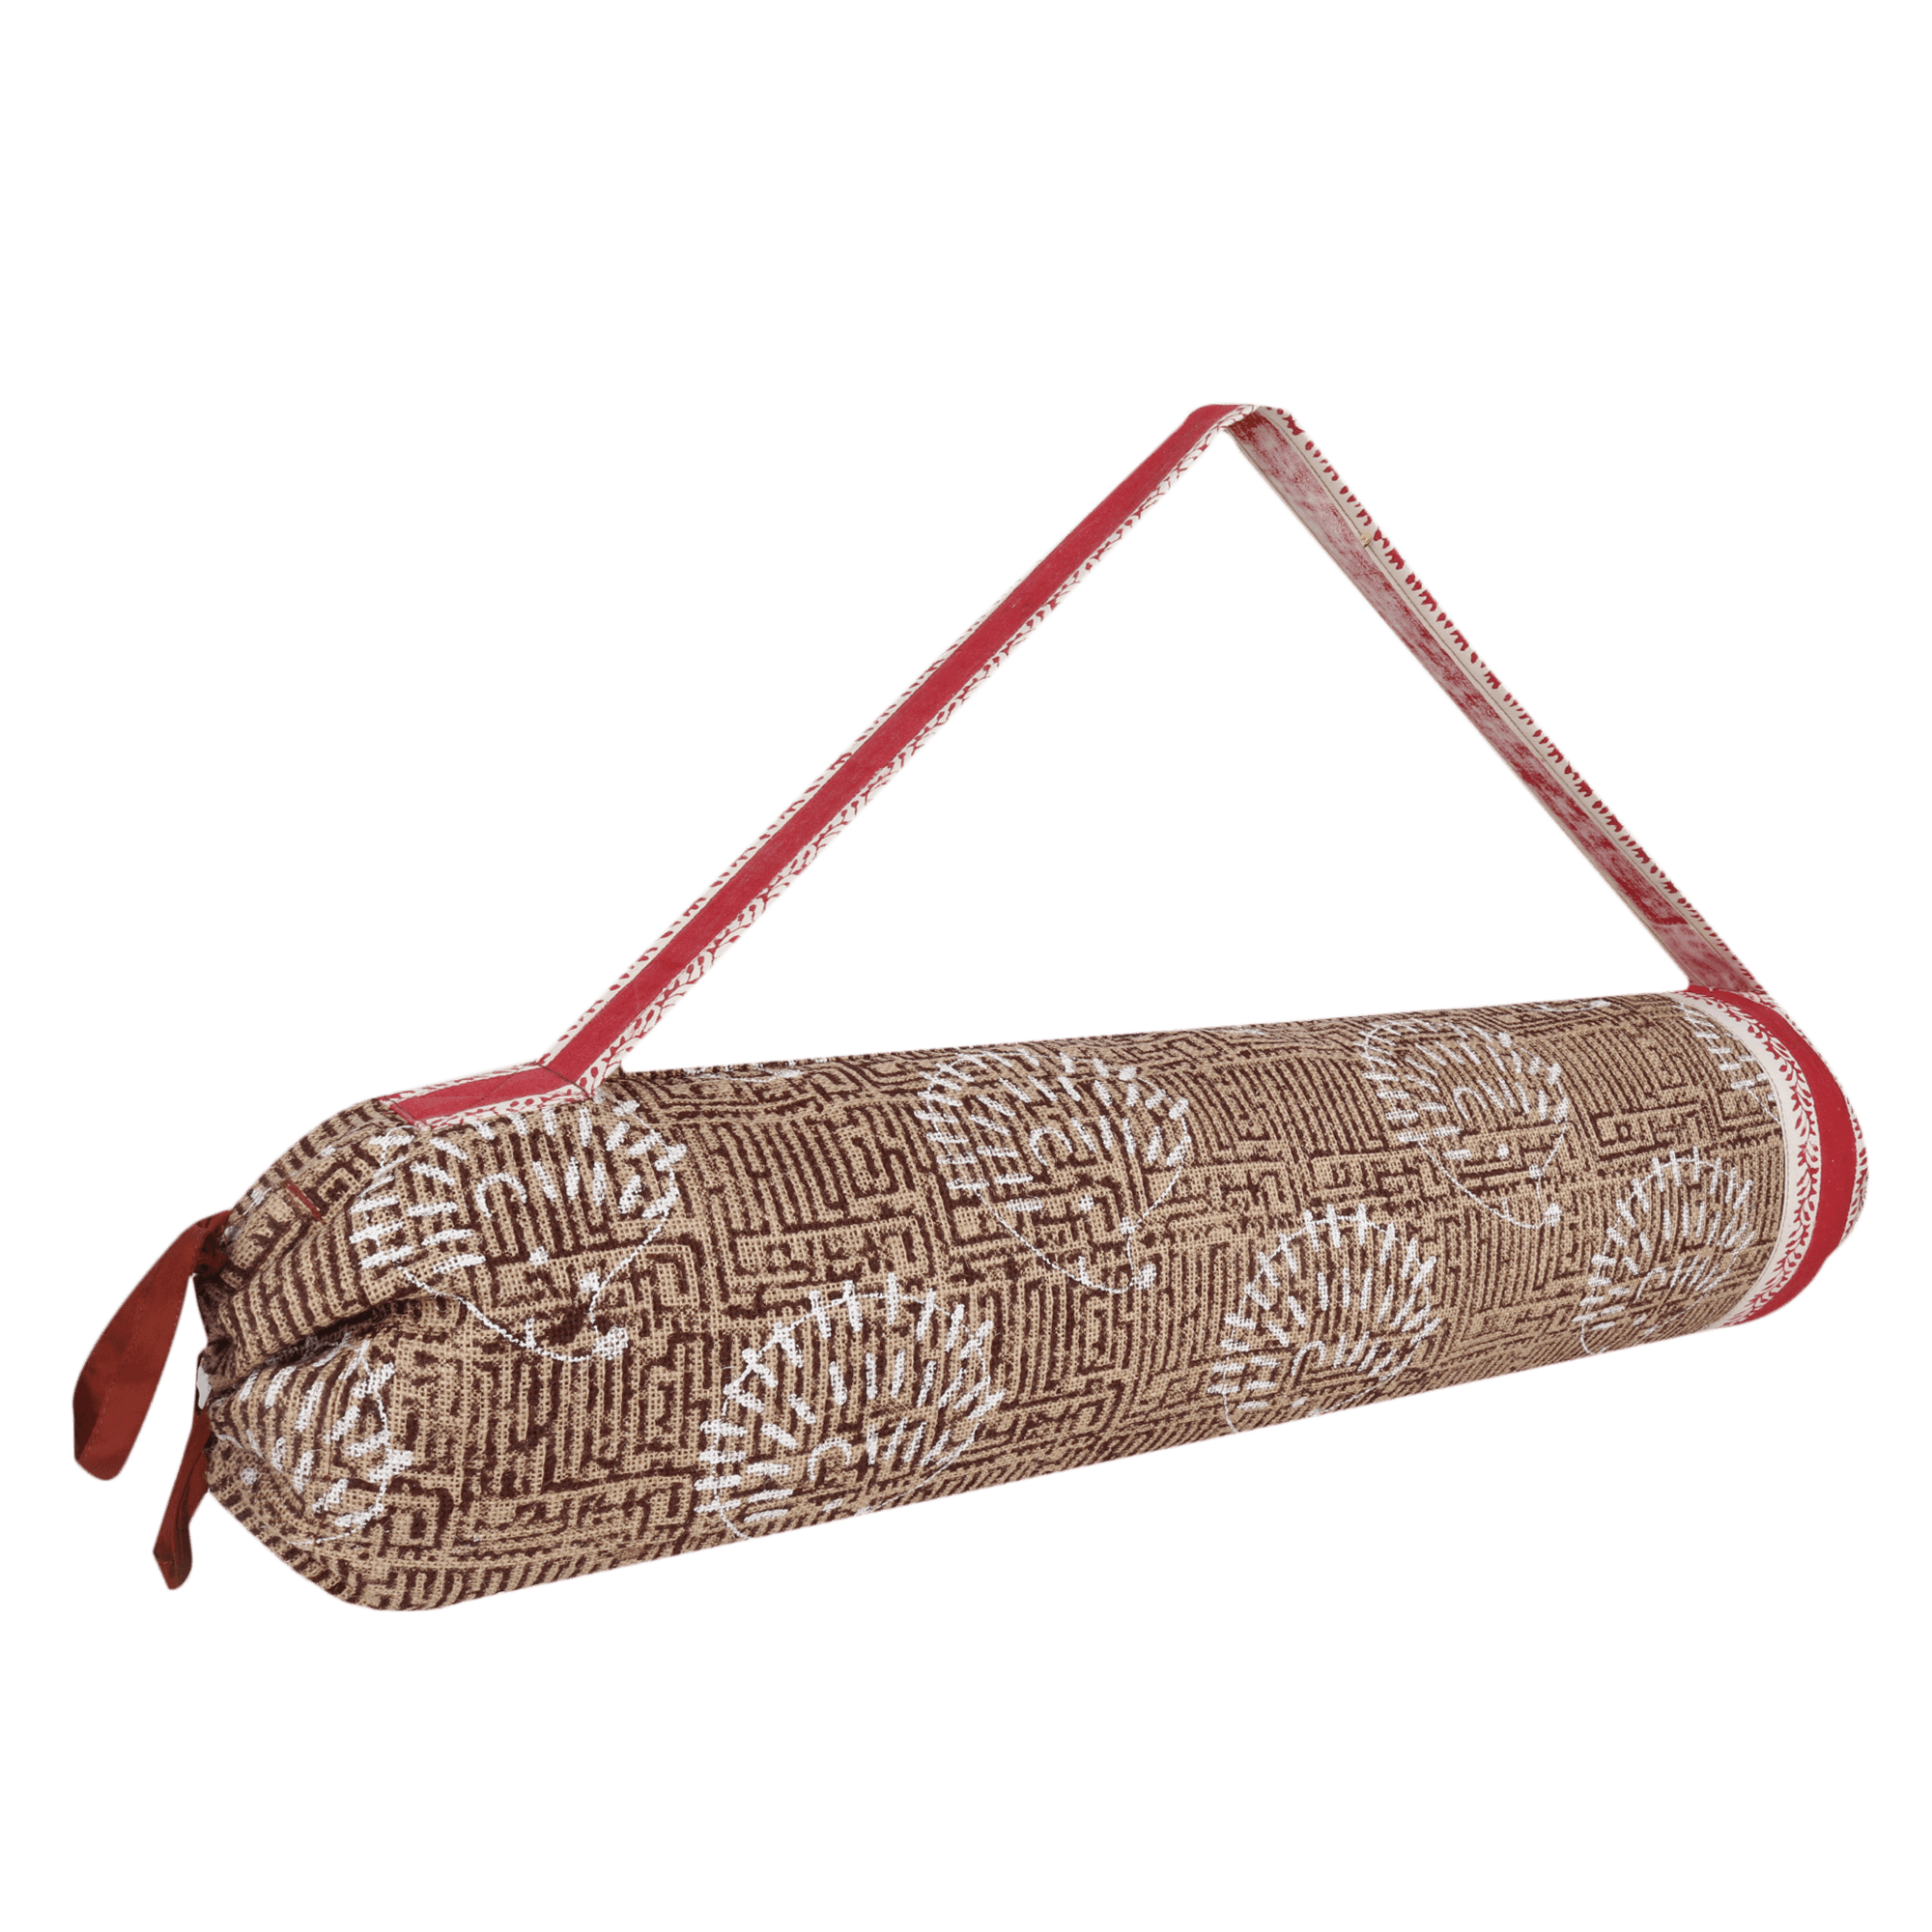 INDHA Hand Block Printed Natural Jute Yoga Mat Bag/Yoga Mat Cover - Curated  online shop for handcrafted products made in India by women artisans